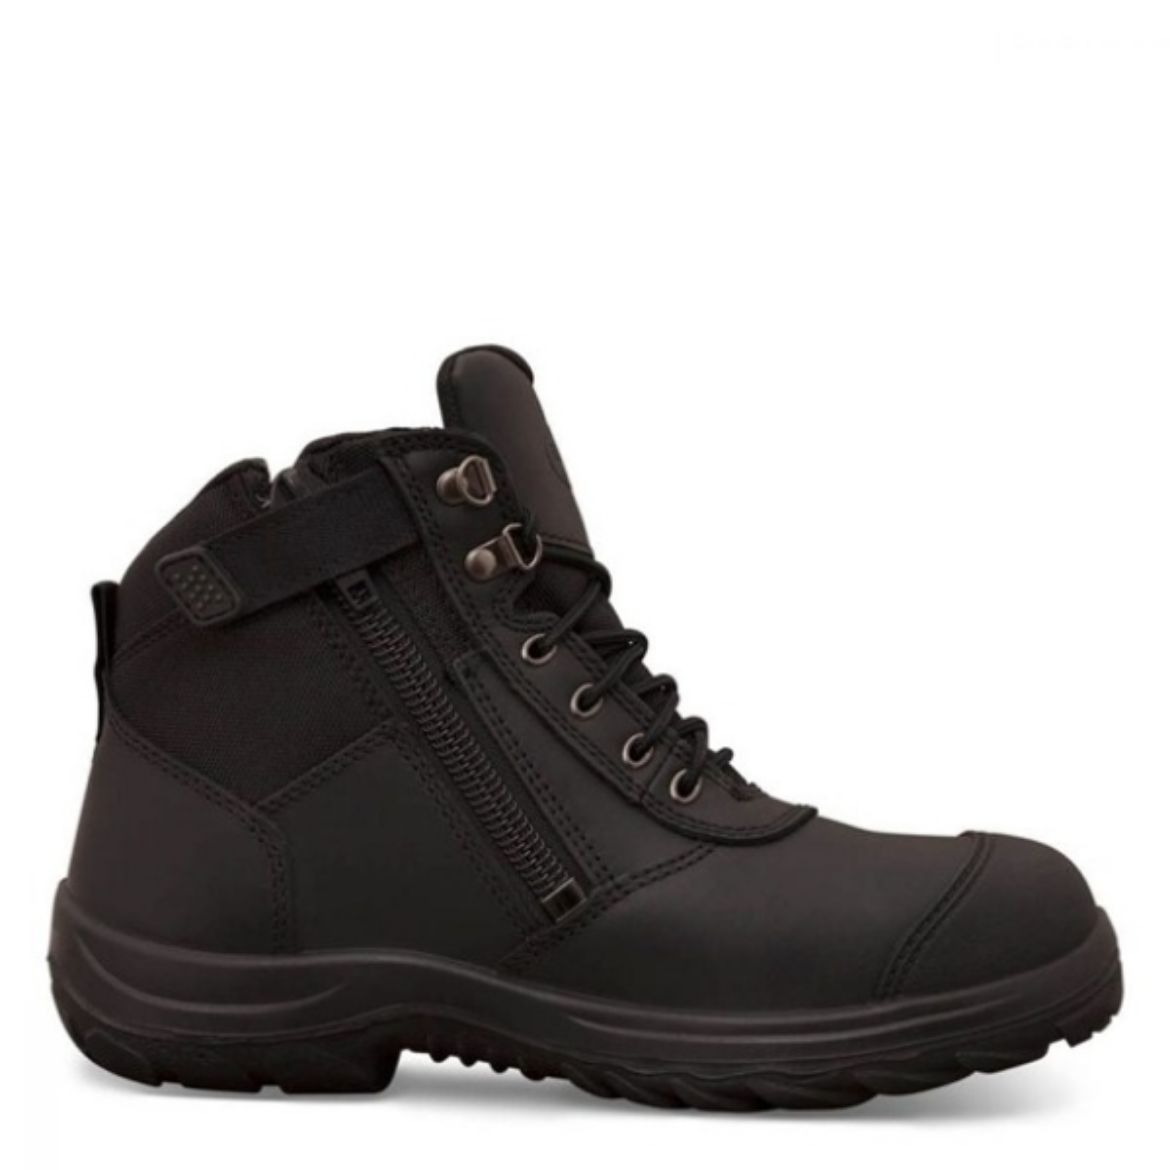 Picture of HIKER LACE UP ZIP SIDE BOOT, WATER RESISTANT FULL GRAIN LEATHER / CORDURA,
FULLY LINED, TOE SCUFF PROTECTION